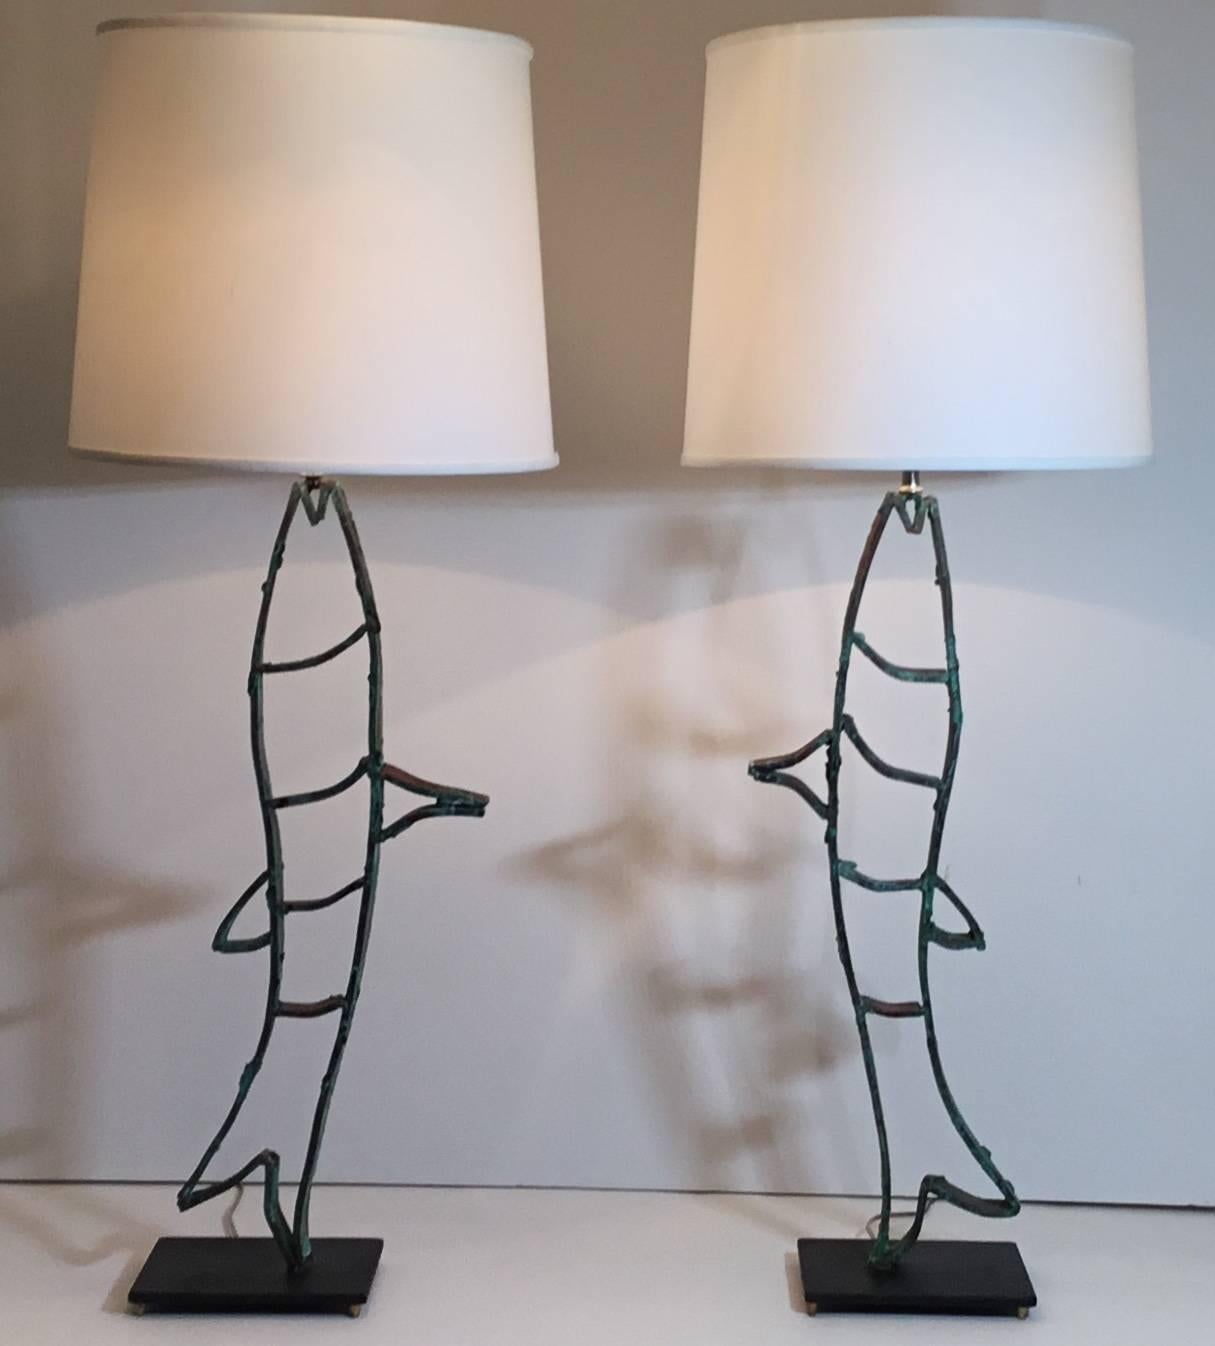 One of a kind pair of sculpture fish made of copper, beautifully weathered and oxidized .professionally mounted on steel base, wired and electrified to make fantastic pair of table lamps.
Shade are not included.
Hight with the shades 42”
Steel